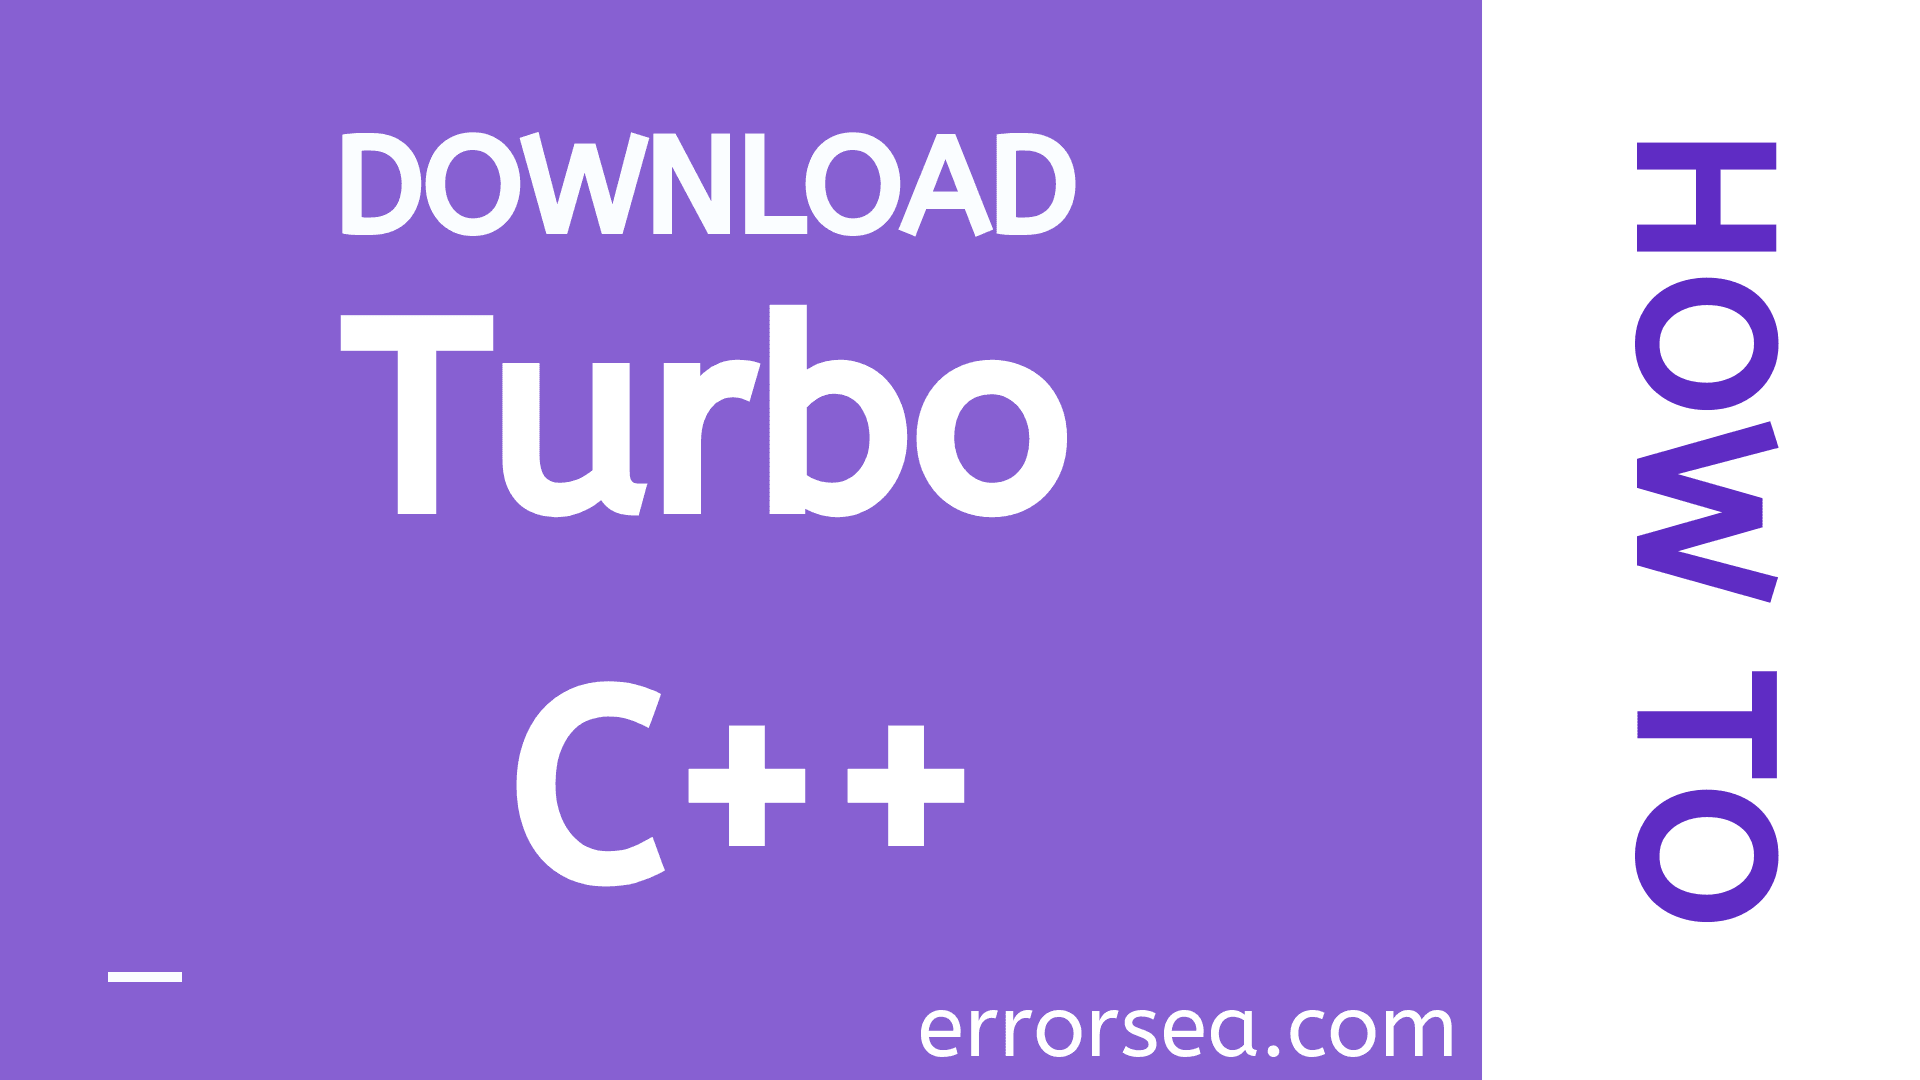 Download and Install Turbo C++ for Windows 10 (Full Installation Guide)